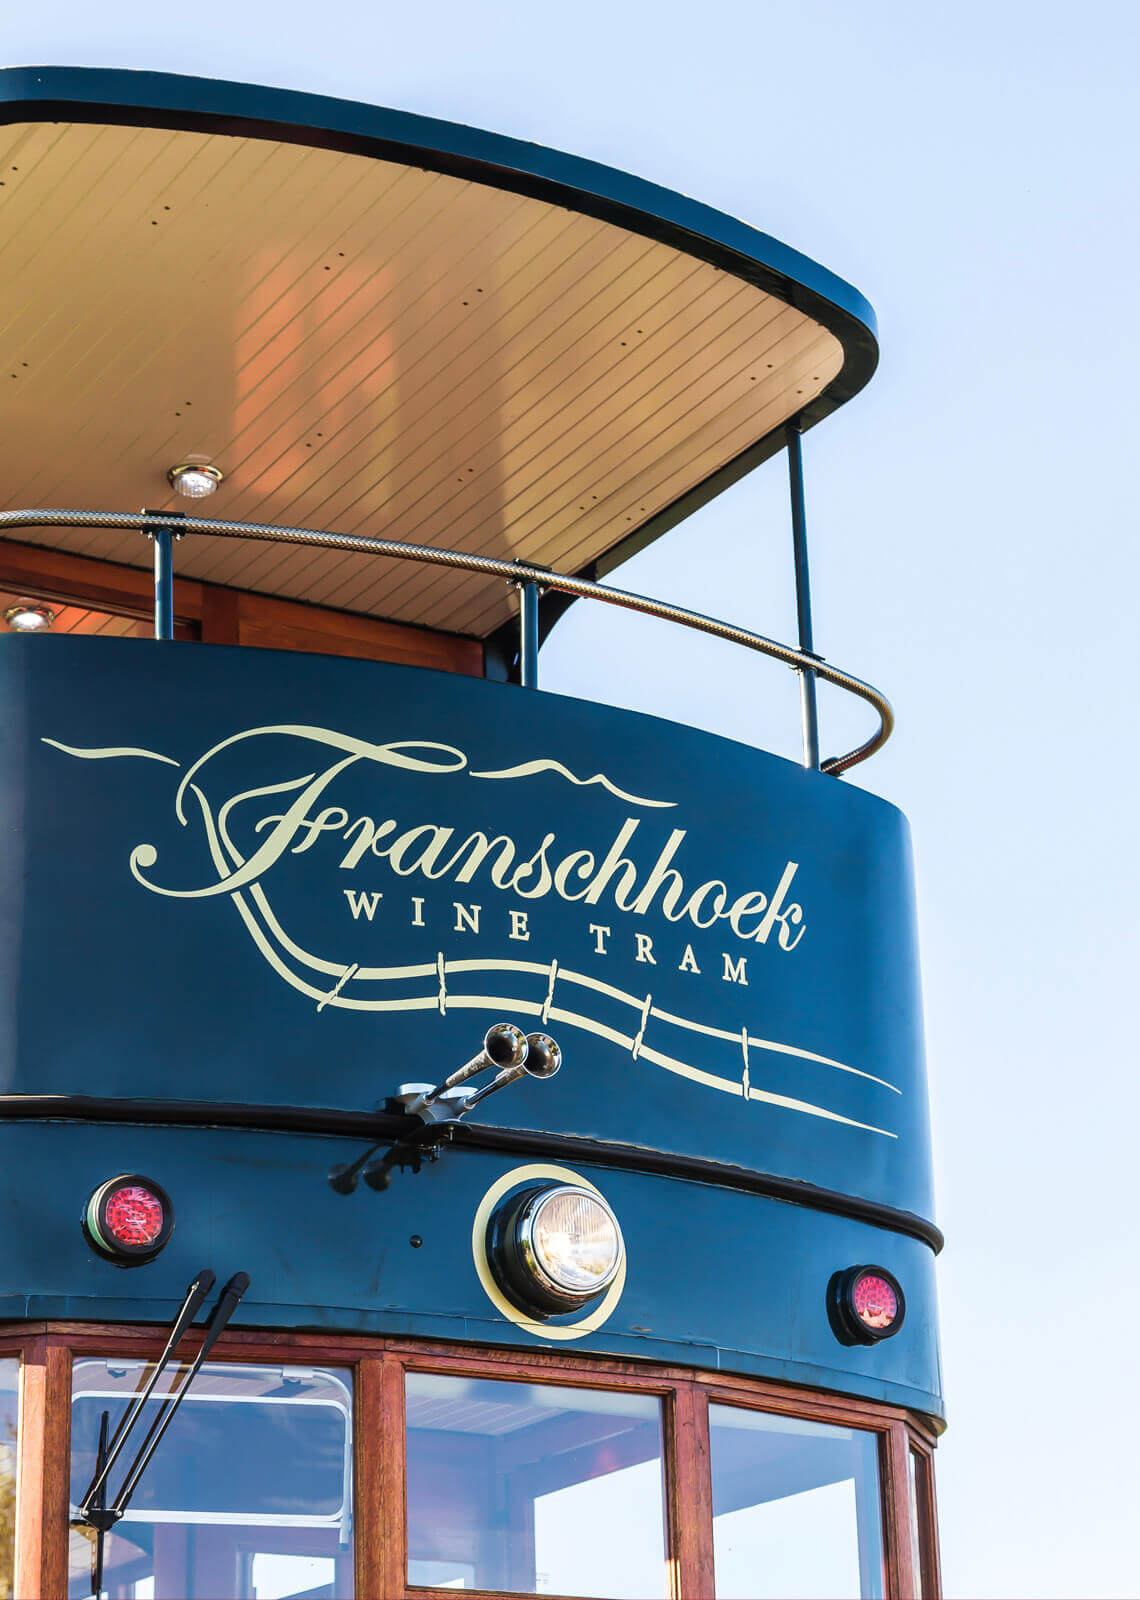 The tram offers eight different routes and each route visit up to six wine estates